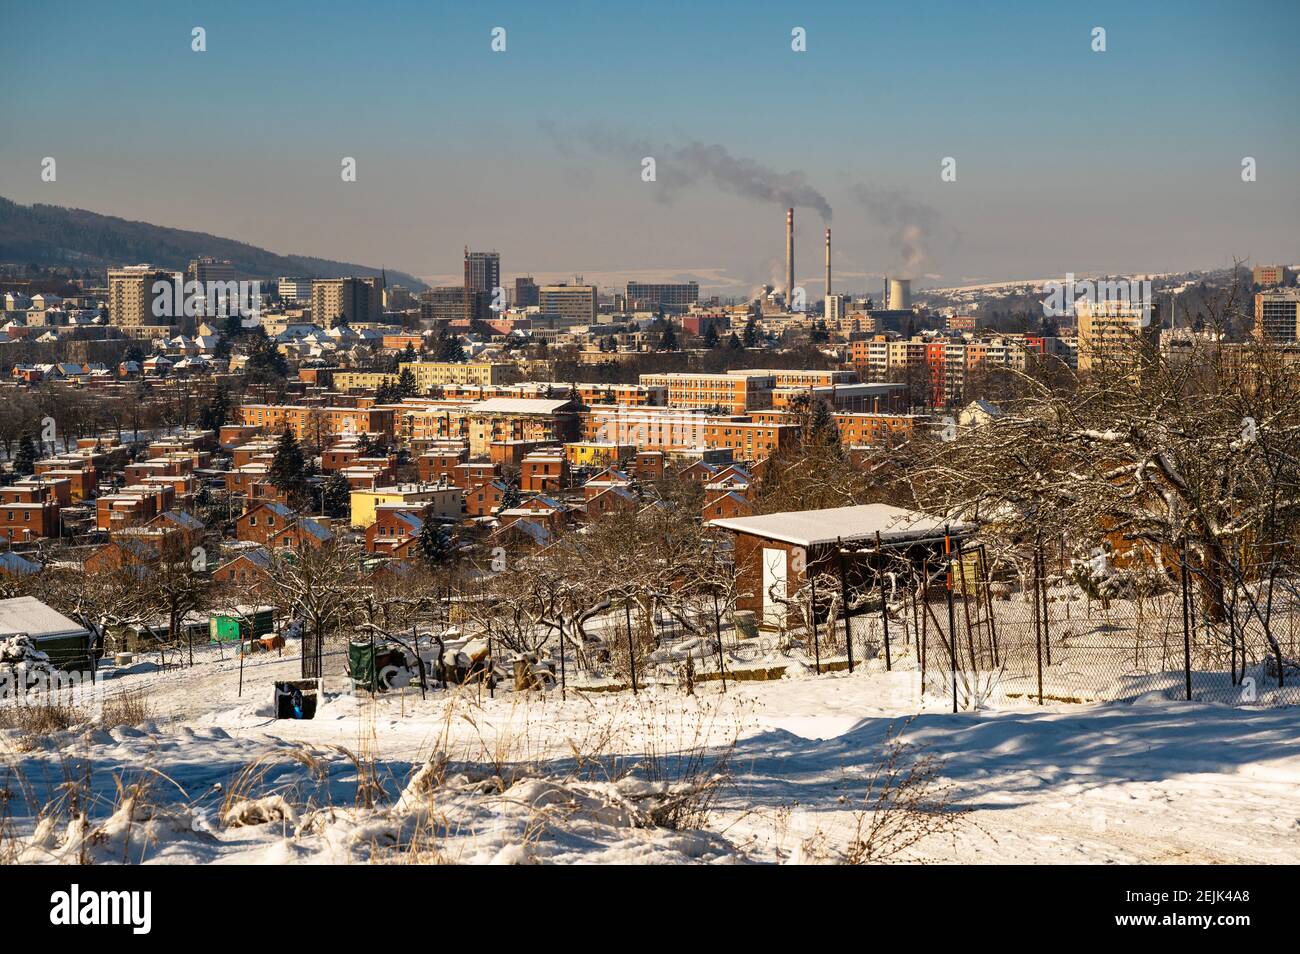 Snowy outskirts and downtown view of city Zlin with typical red brick houses and heating plant chimney on background. Czech republic. Stock Photo